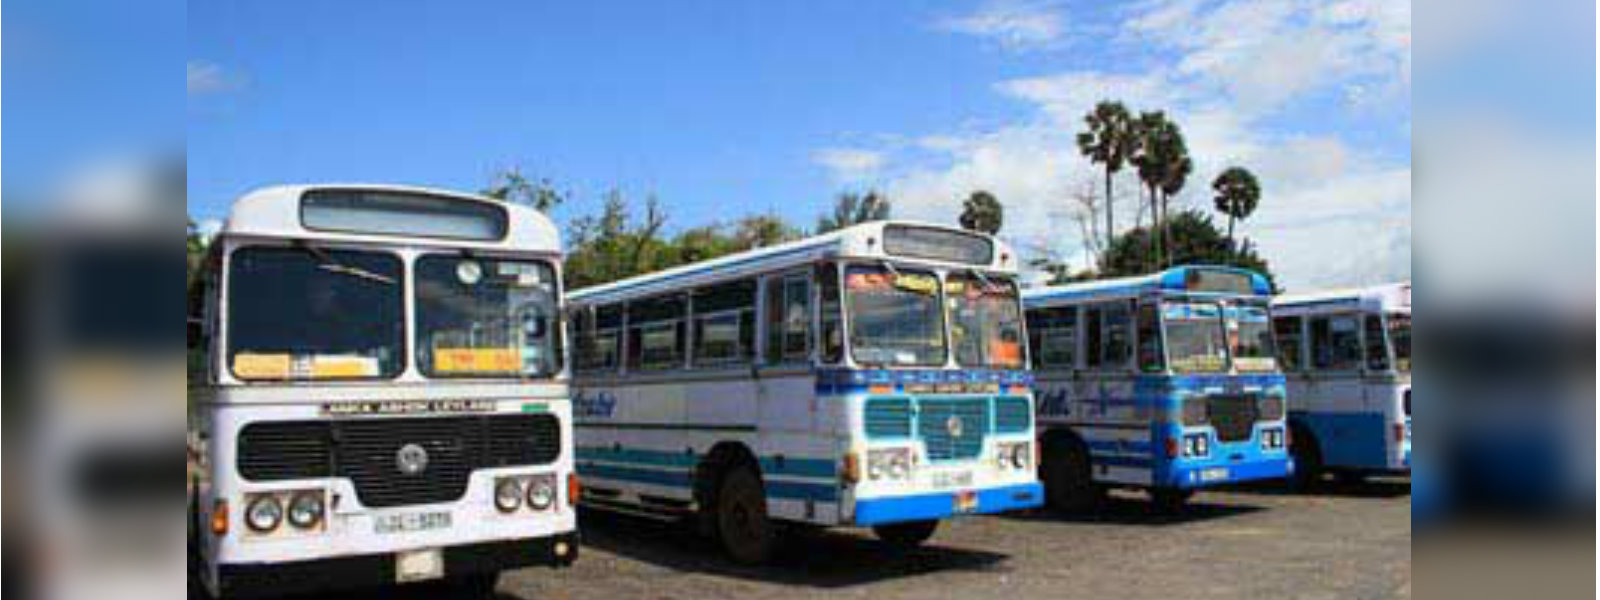 Bus strike enters its 2nd day